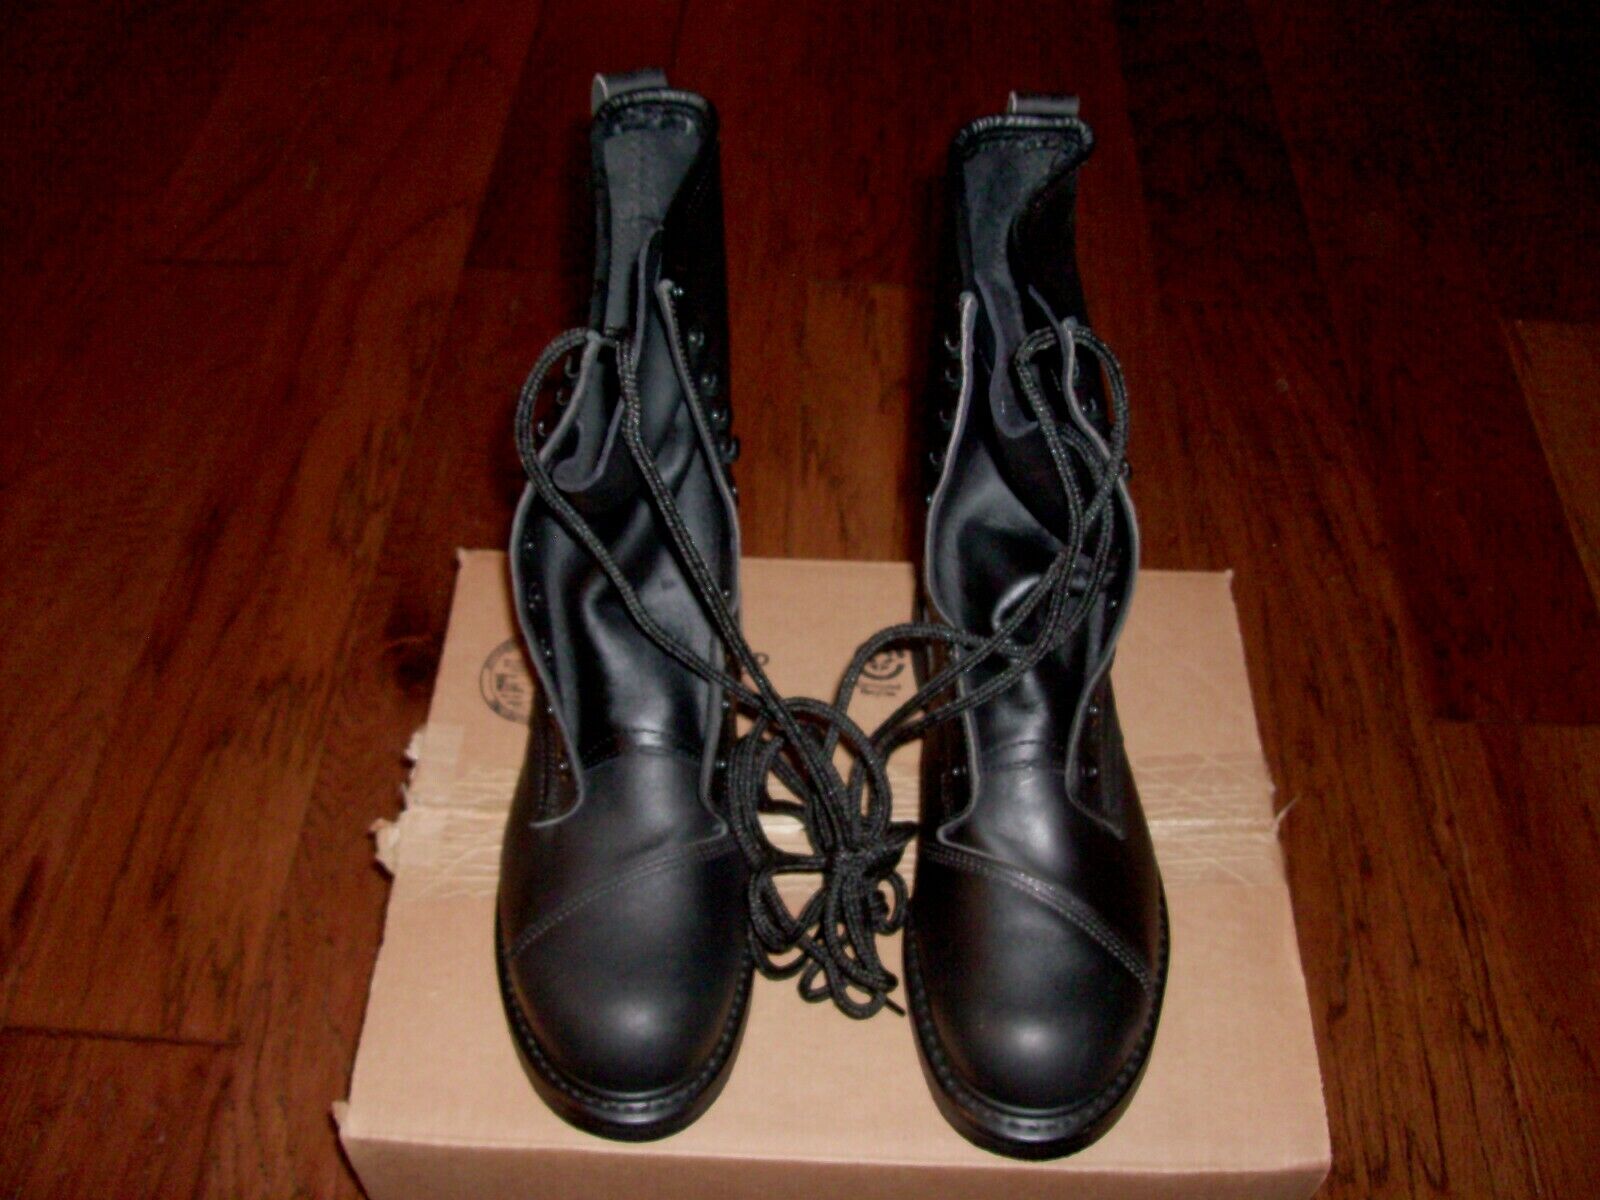 NEW U.S MILITARY BLACK LEATHER SAFETY TOE CLIMBERS BOOTS 8 1/2 REGULAR ...